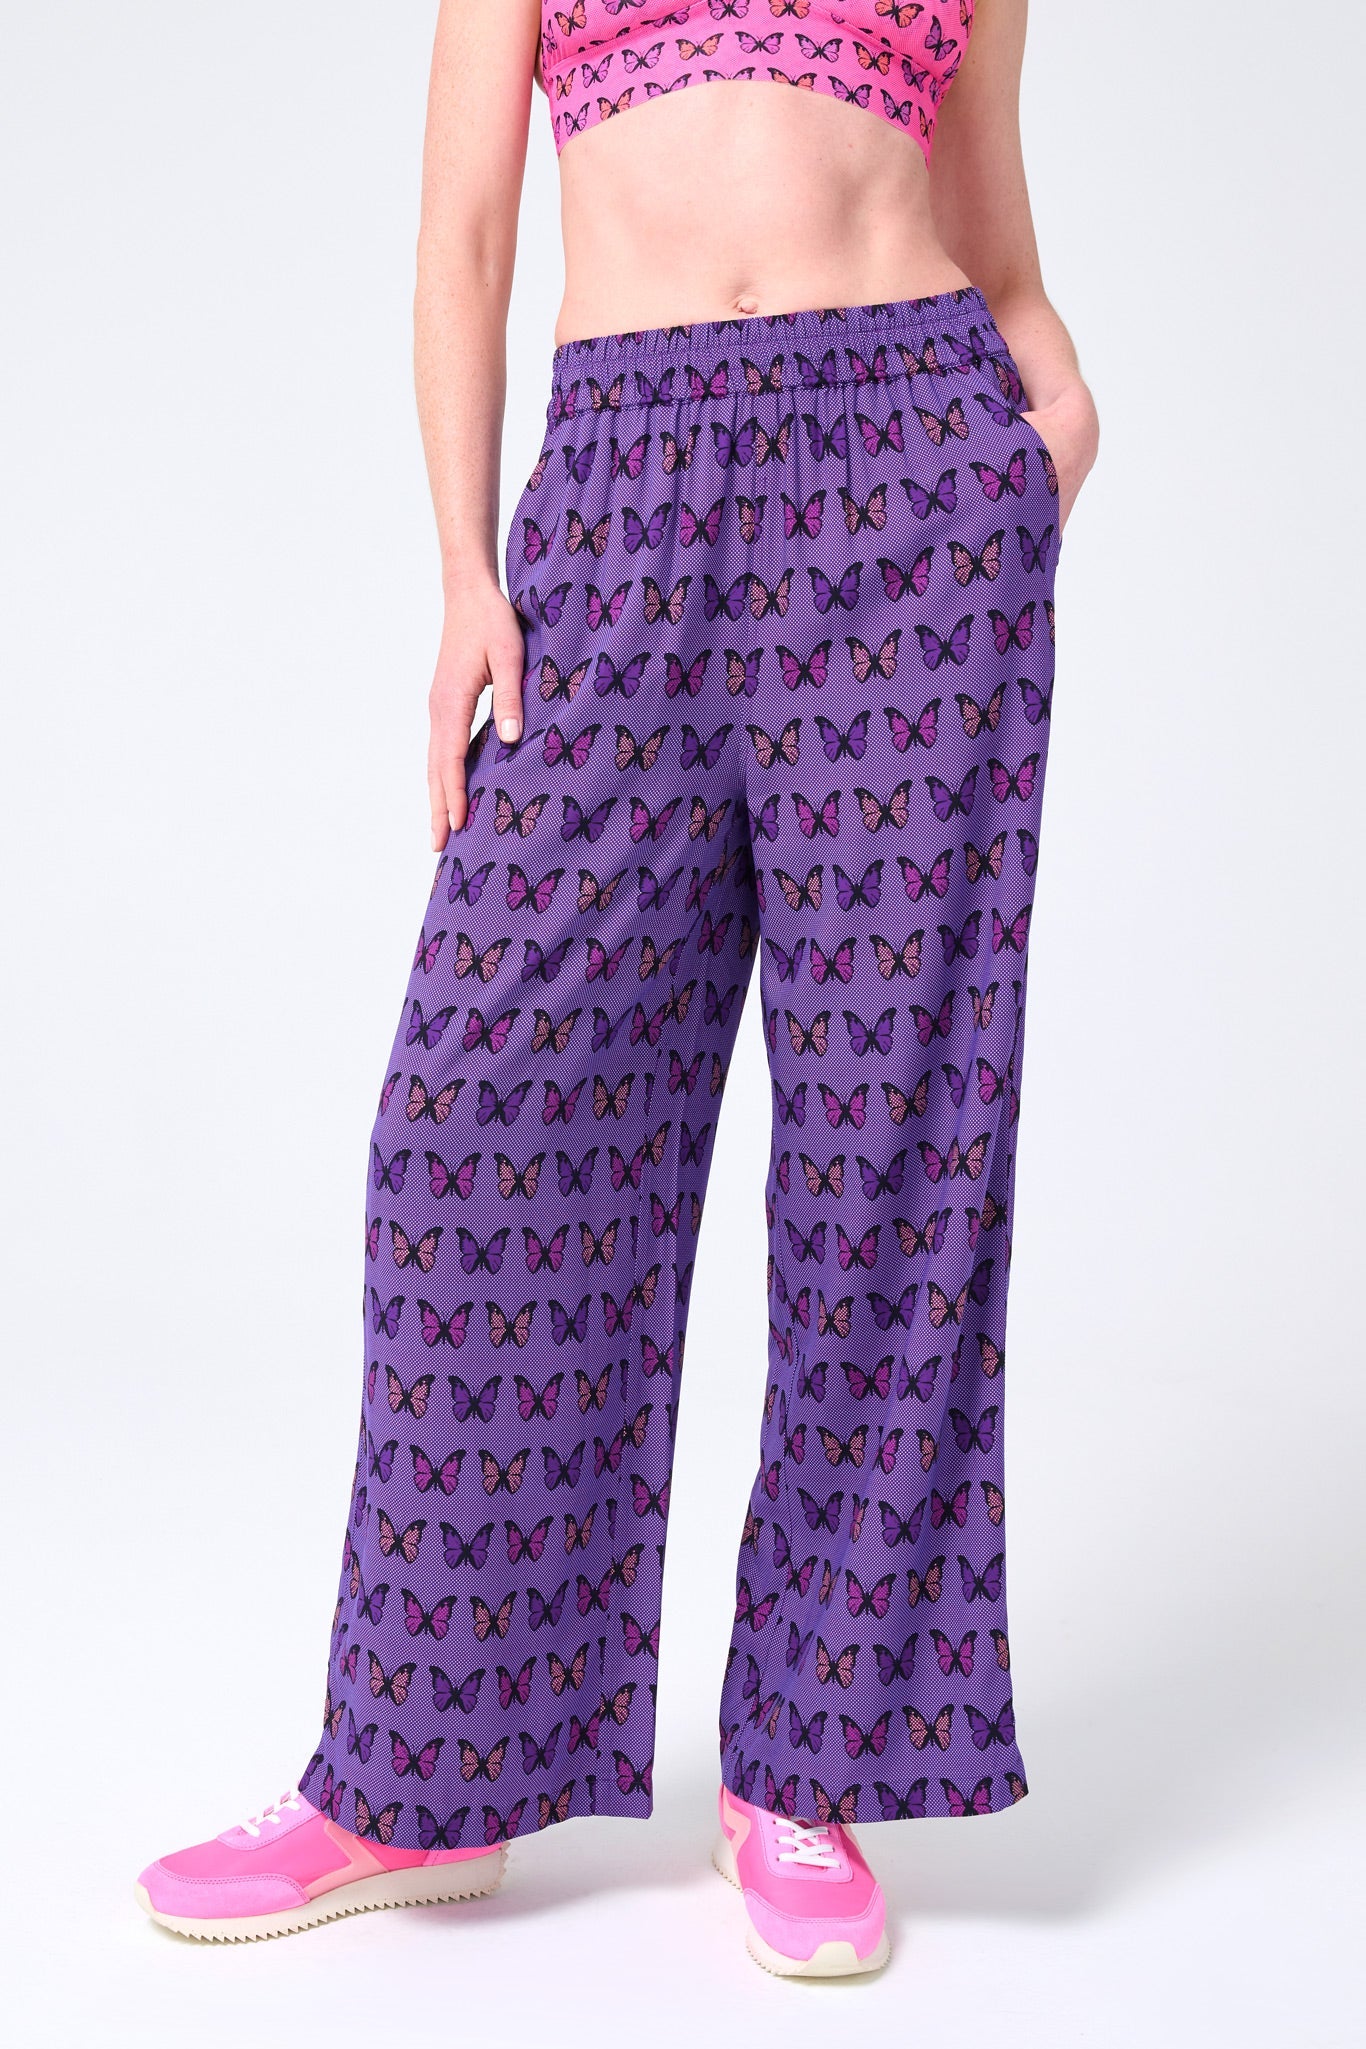 Pant in Halftone Butterfly